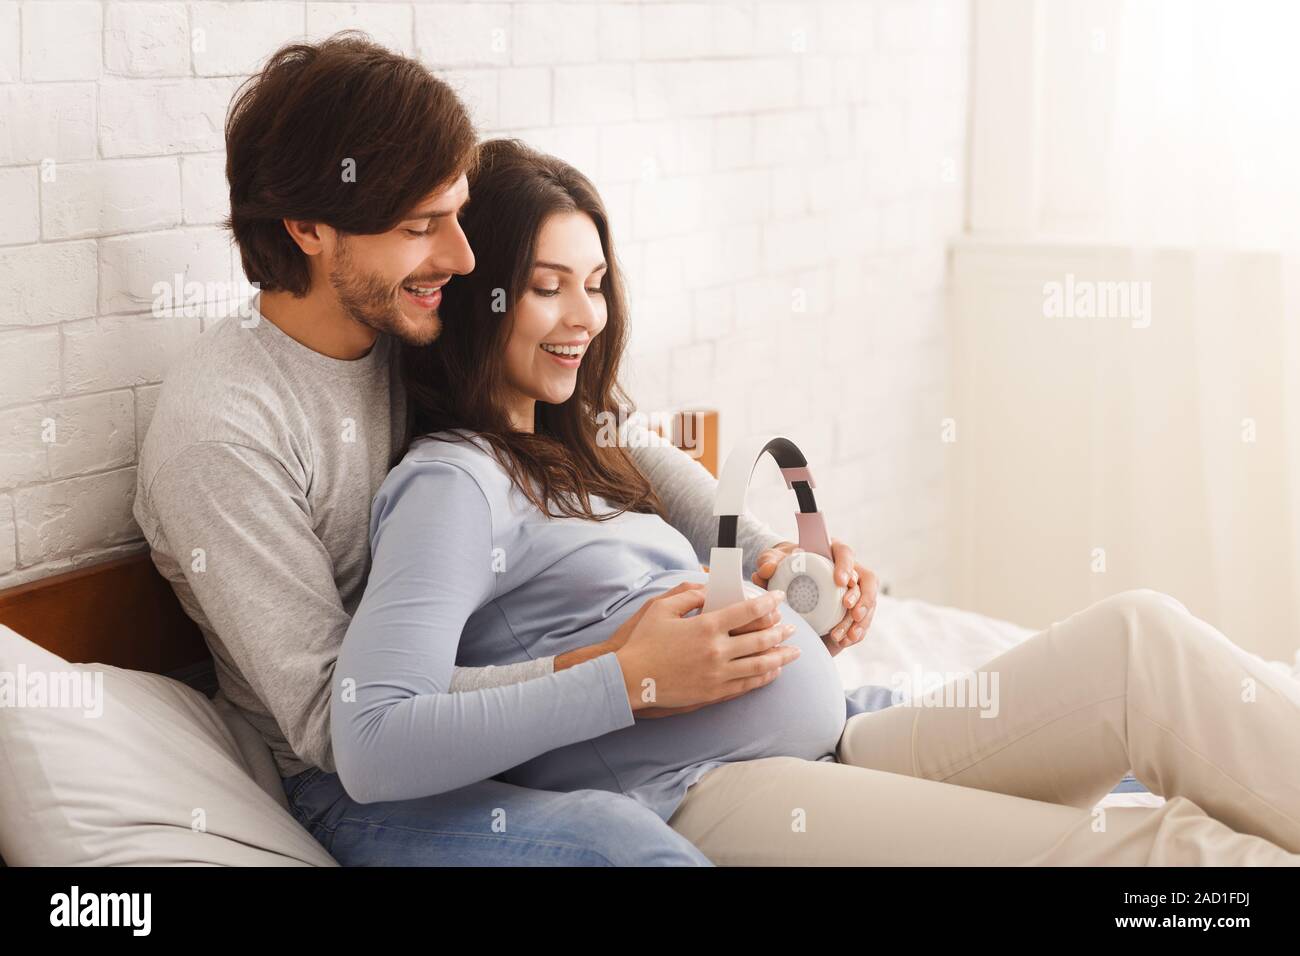 Pregnant woman music lover put the headphones on her belly to let Rebecca  enjoy the music she likes. Girl waiting for a baby keeps headphones on her  Stock Photo - Alamy